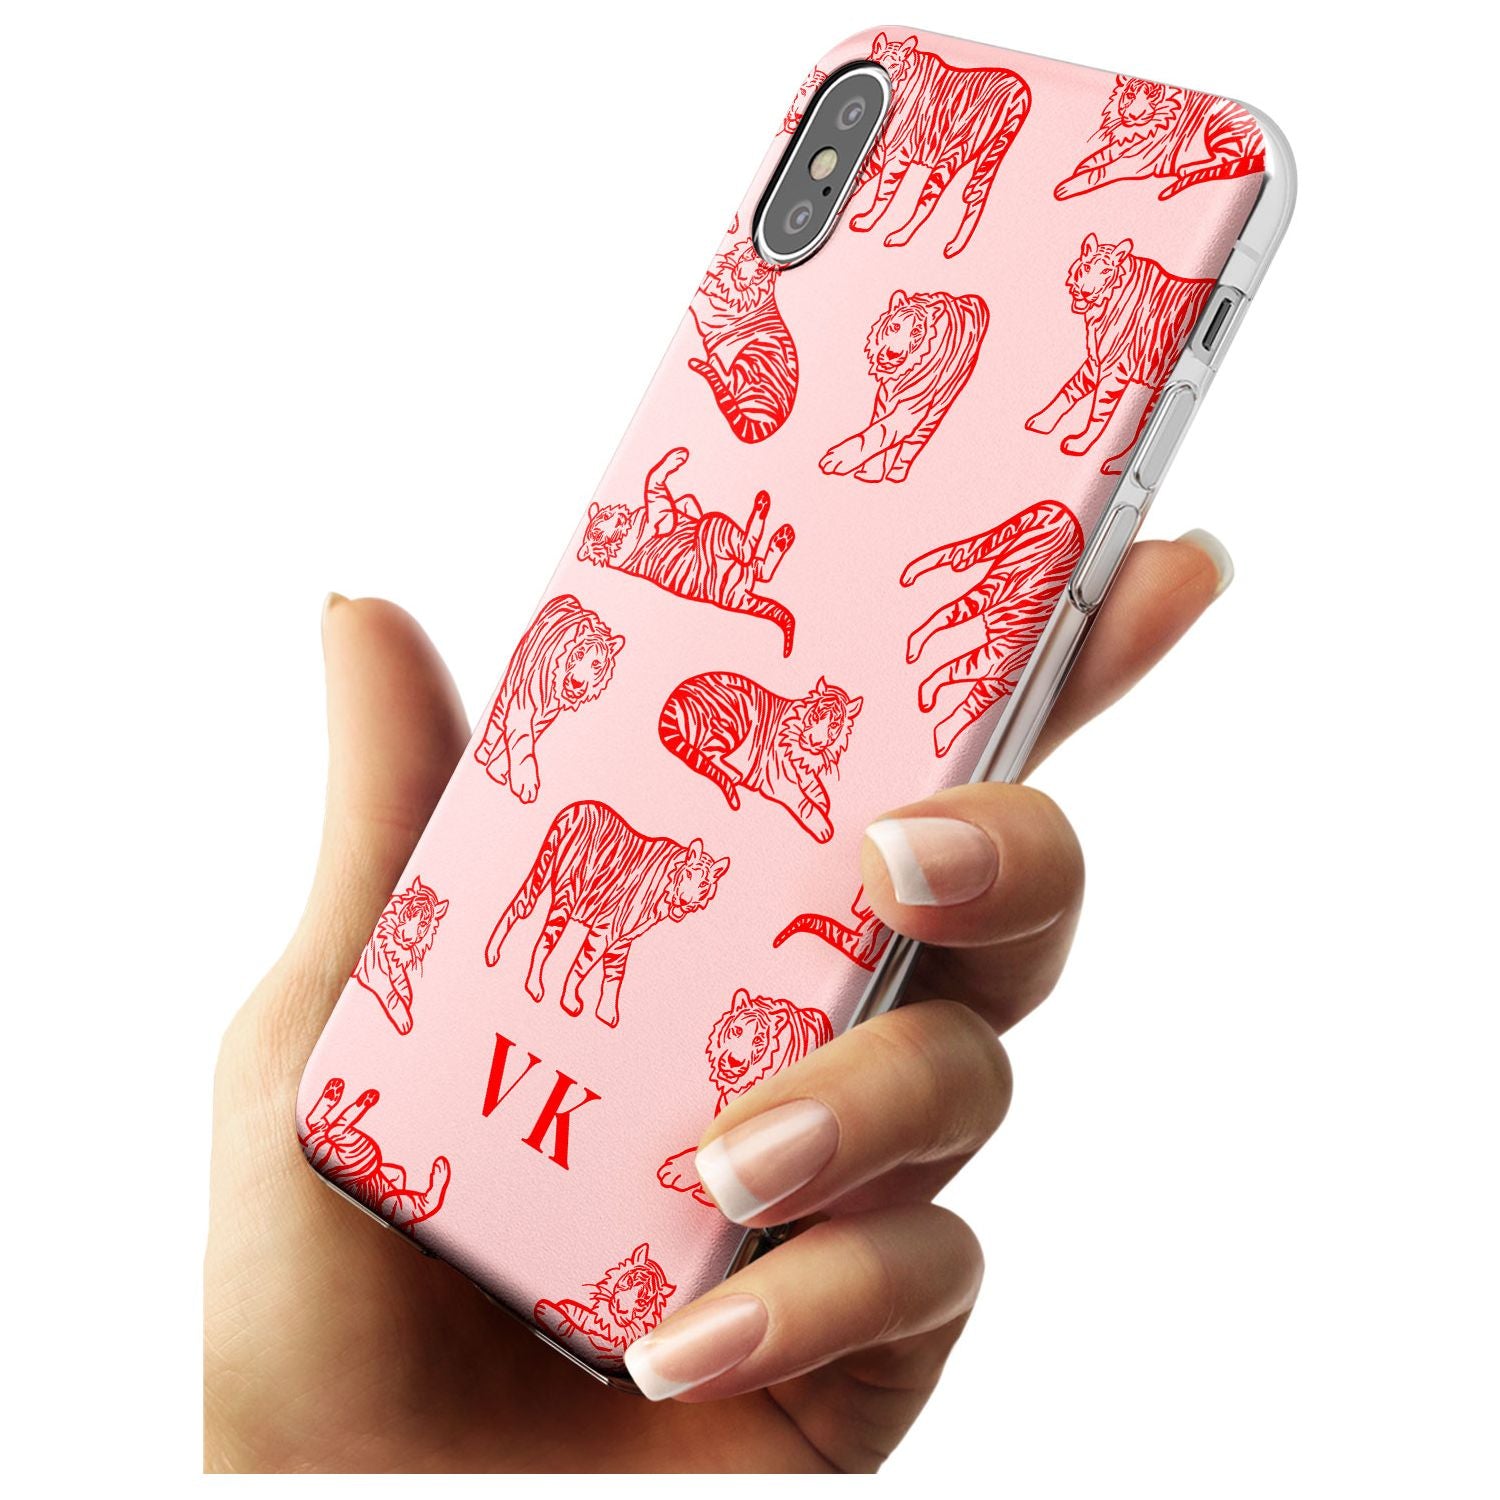 Red Tiger Outlines on Pink iPhone Case   Custom Phone Case - Case Warehouse